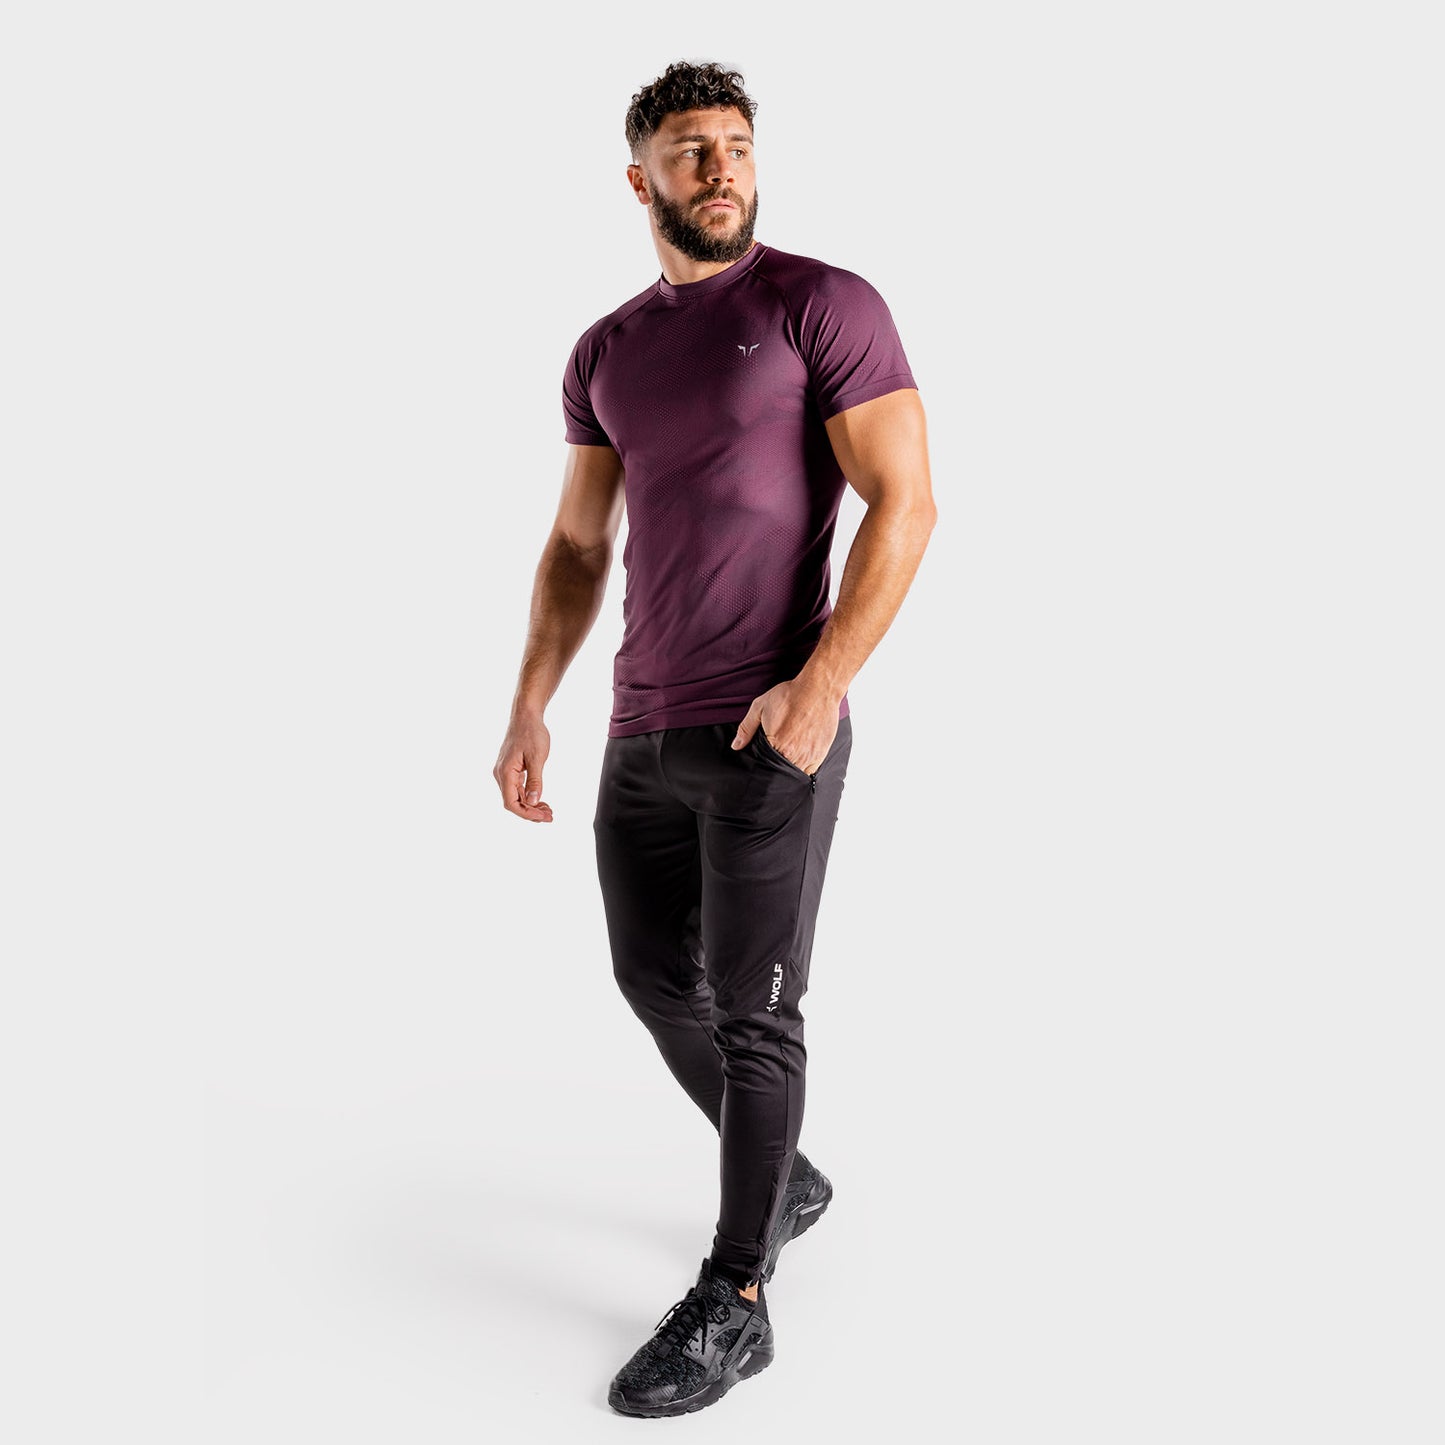 squatwolf-workout-shirts-for-men-wolf-seamless-workout-tee-burgundy-gym-wear